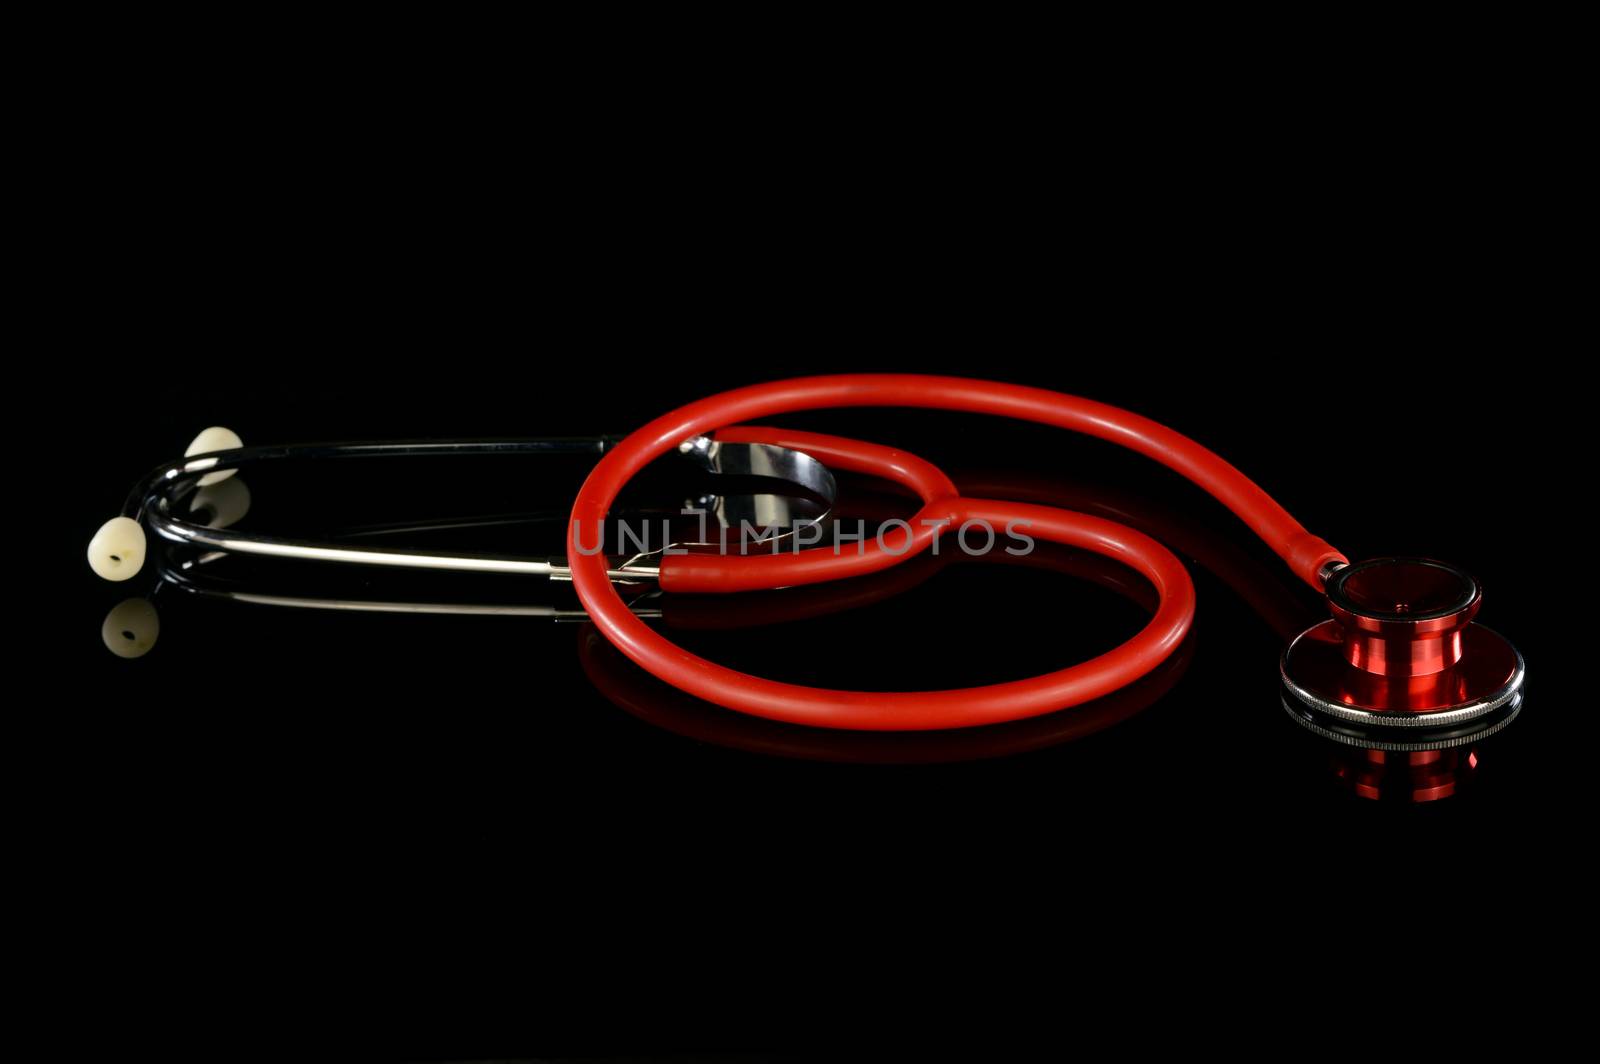 An isolated over black reflective surface medical stethoscope for clinical use.